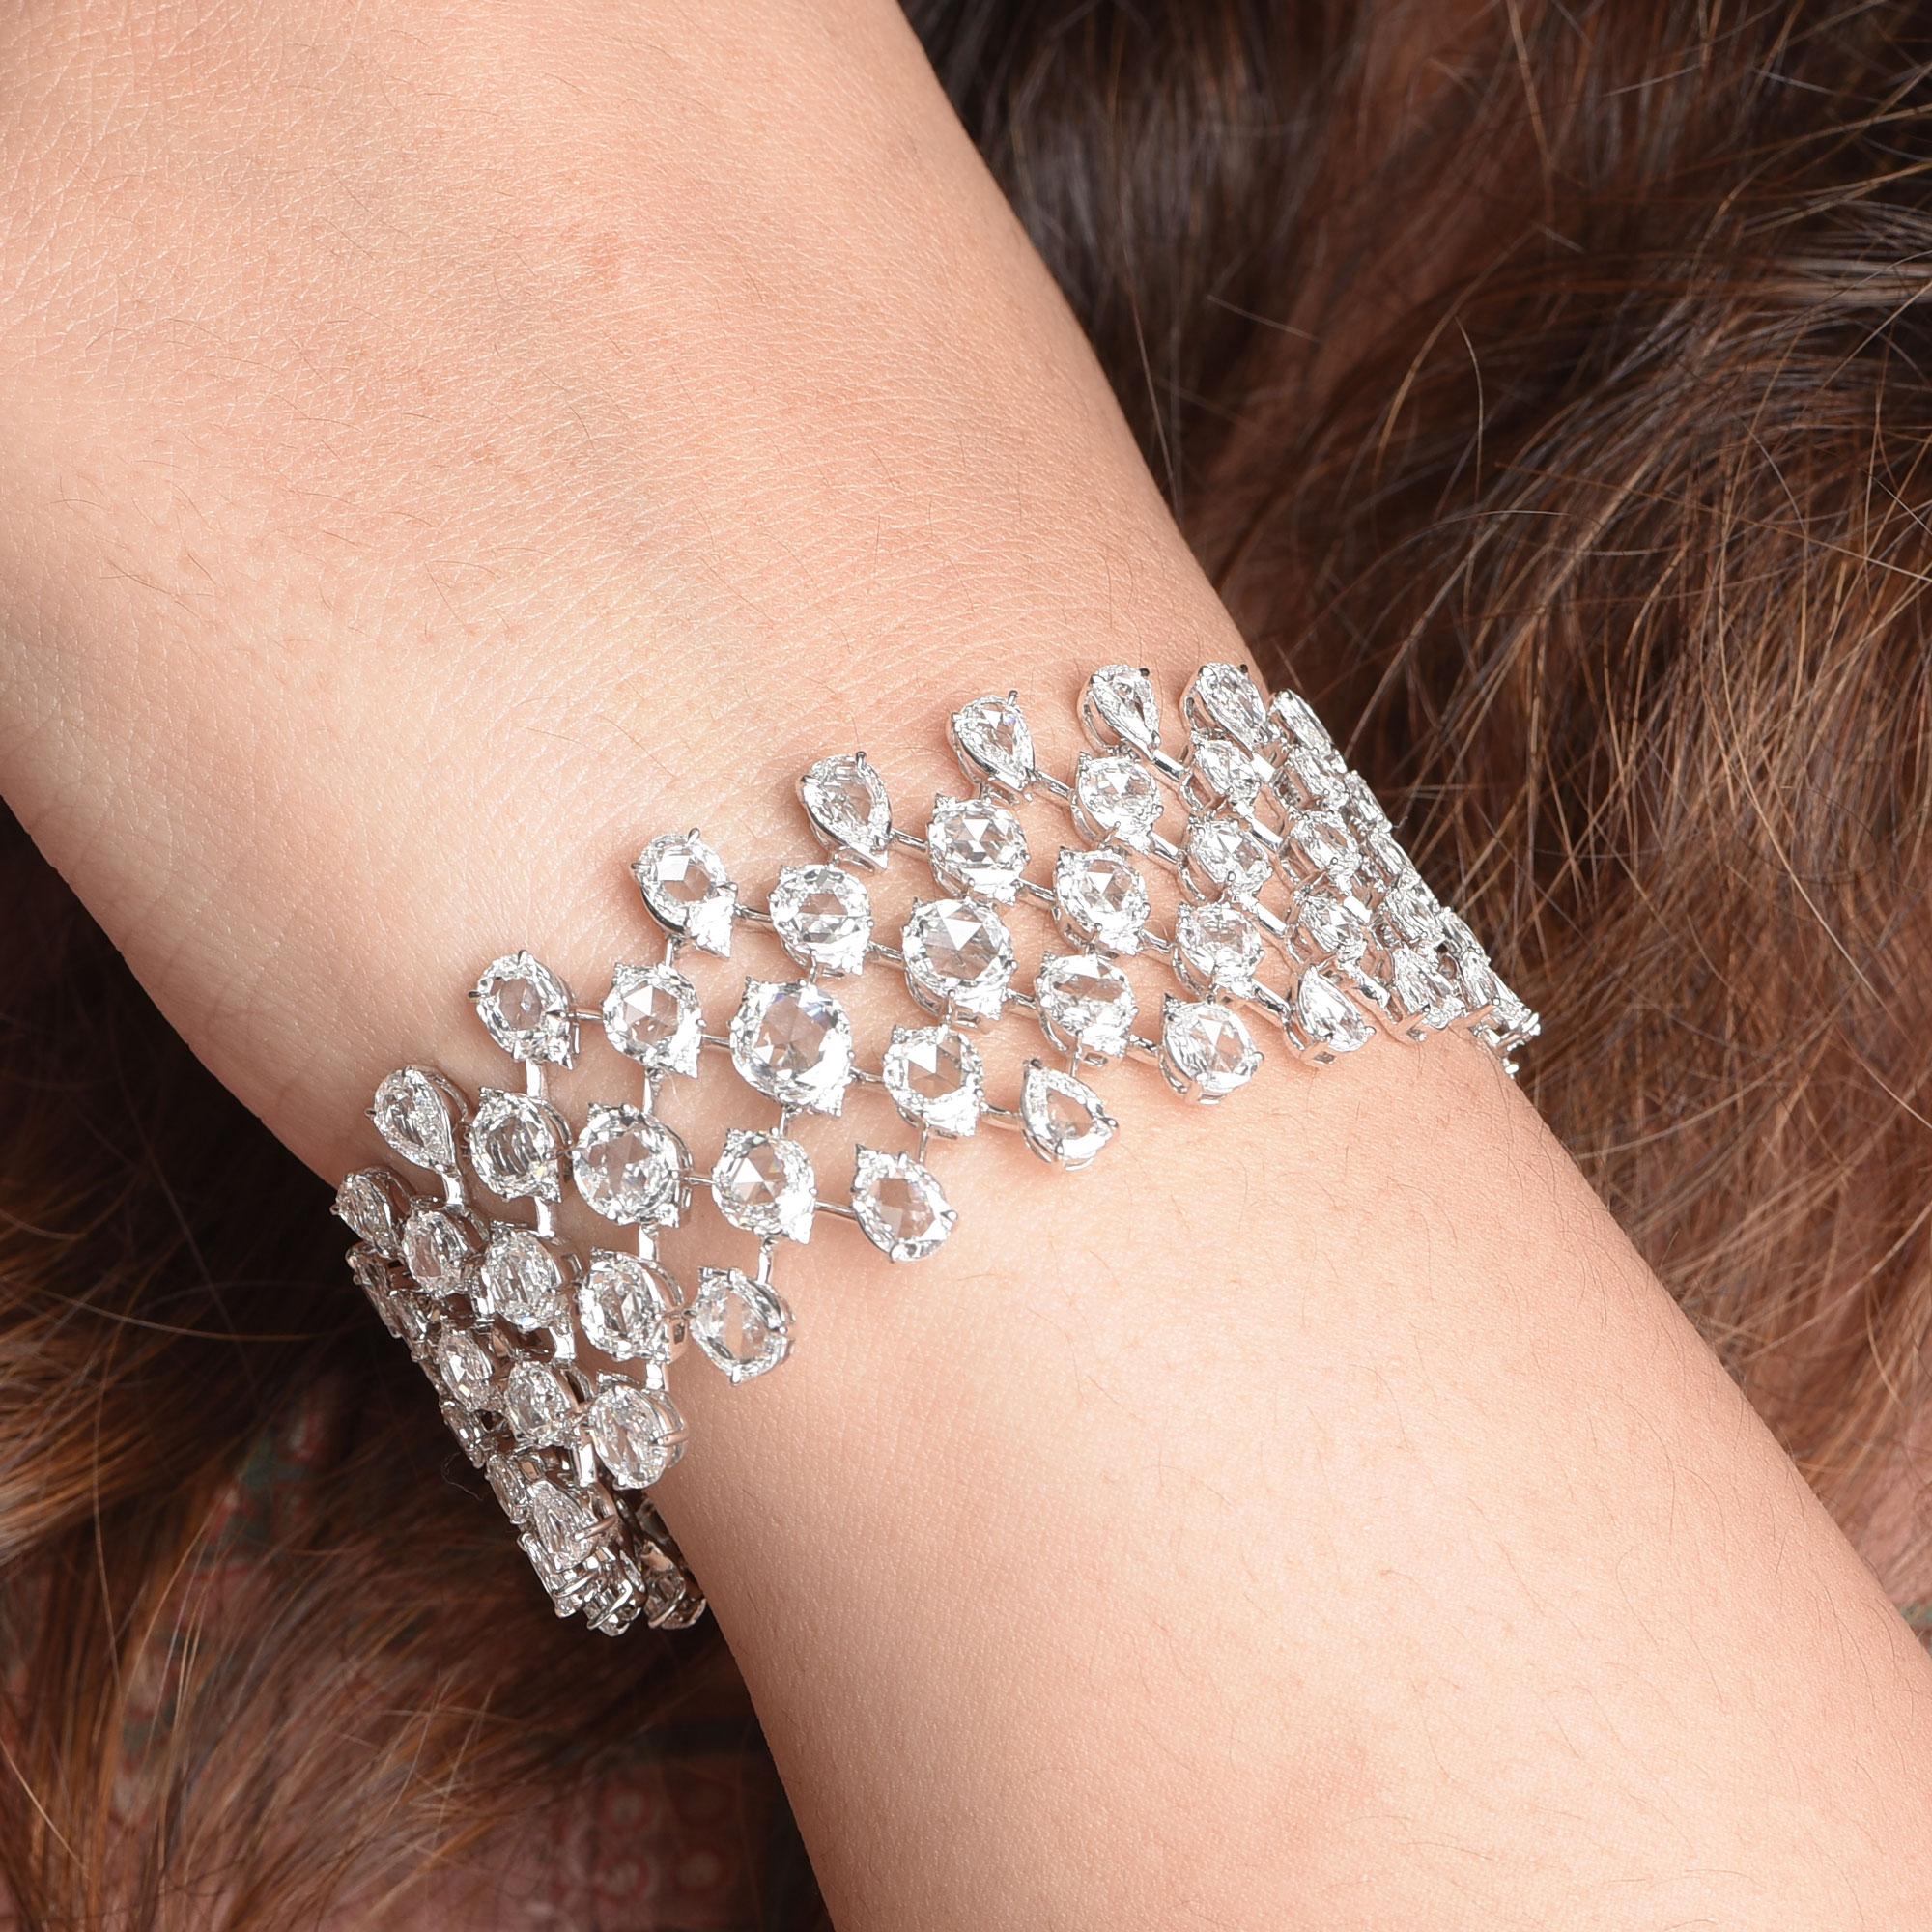 This exquisite bracelet from our Haveli (Royal abode) collection is embellished with an array of brilliant and rose cut diamonds. It is studded with 159 brilliant round, 66 rose cut round, 23 rose cut pear and 15 rose cut oval diamonds, crafted to